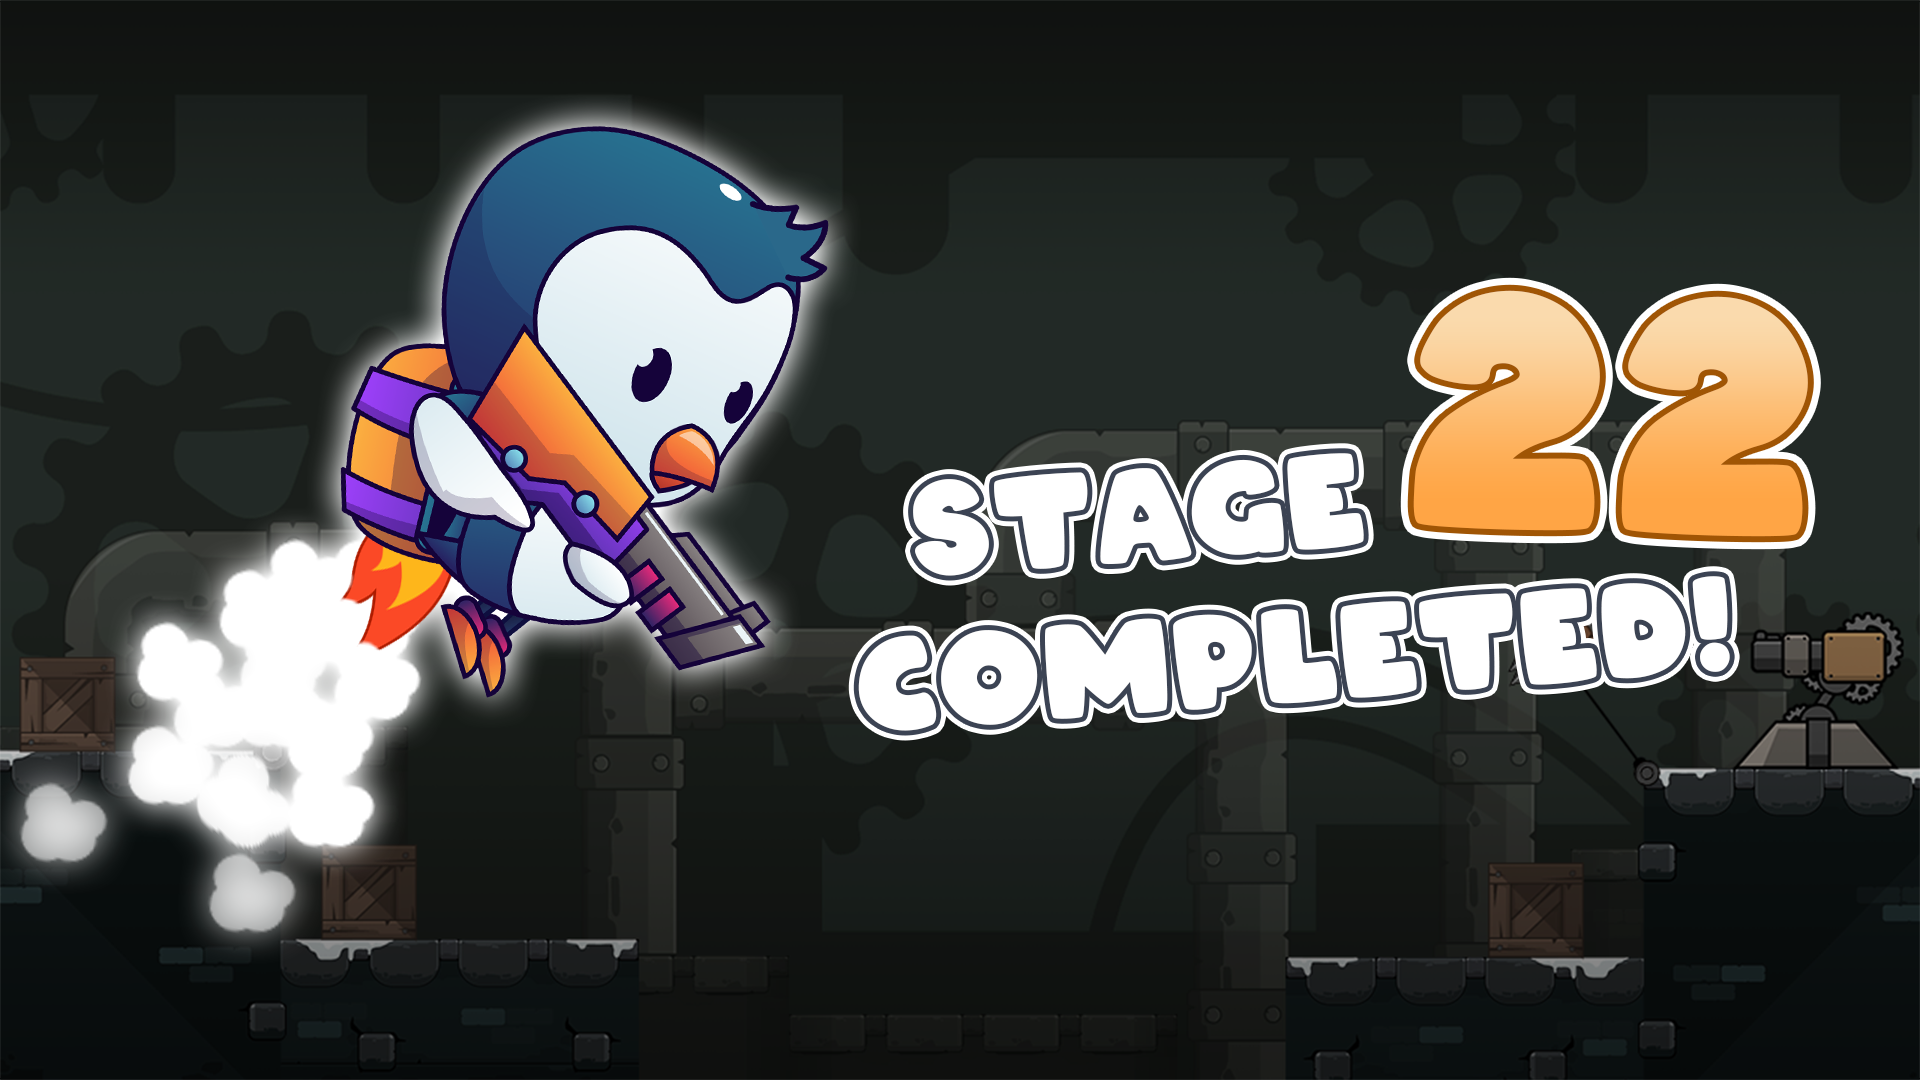 Stage 22